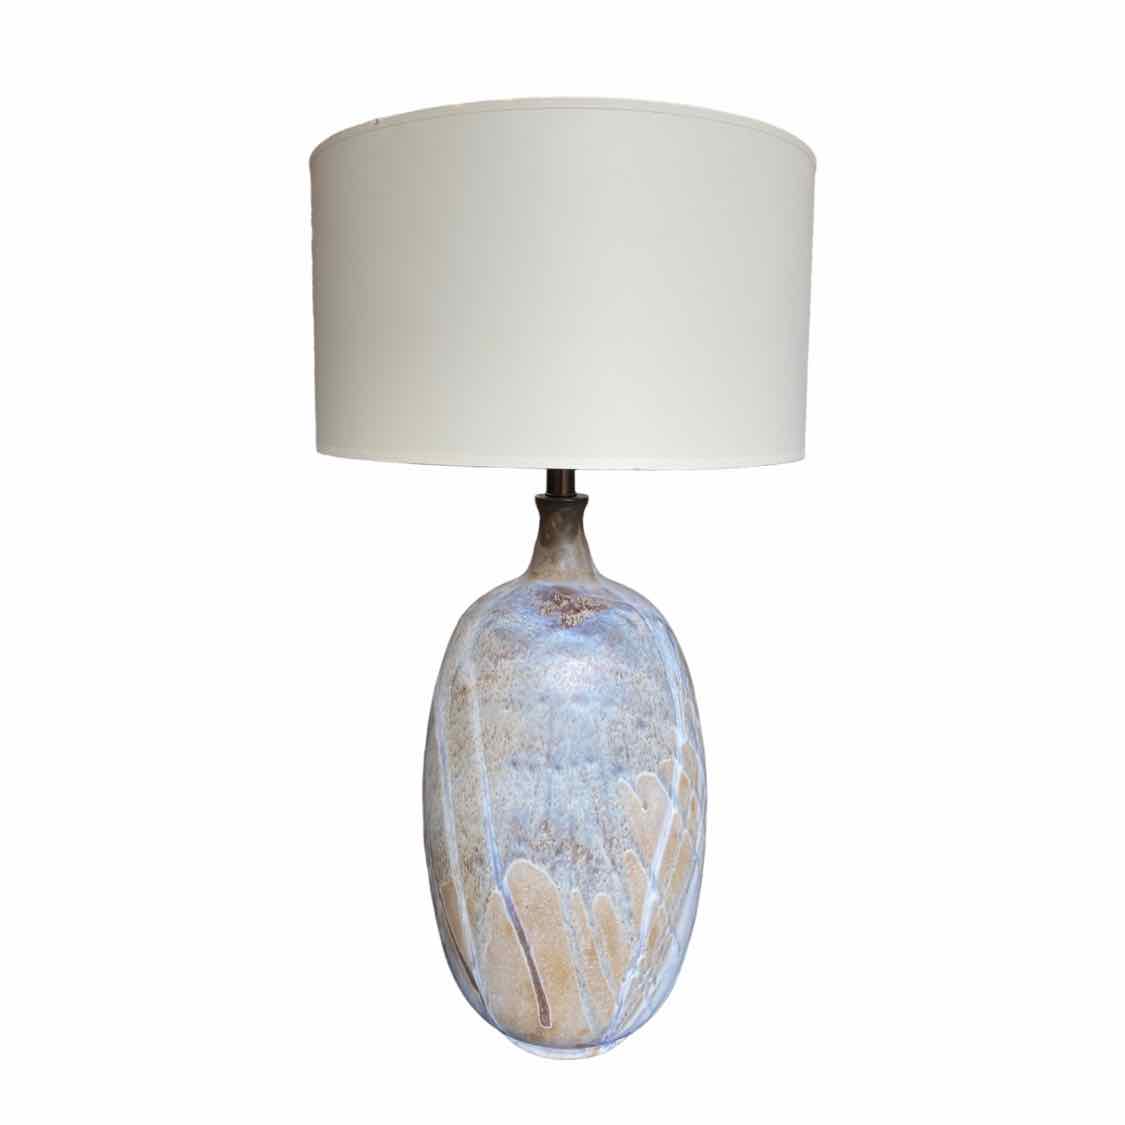 Grey/Blue Ceramic Table Lamp w/ White Shade - colletteconsignment.com